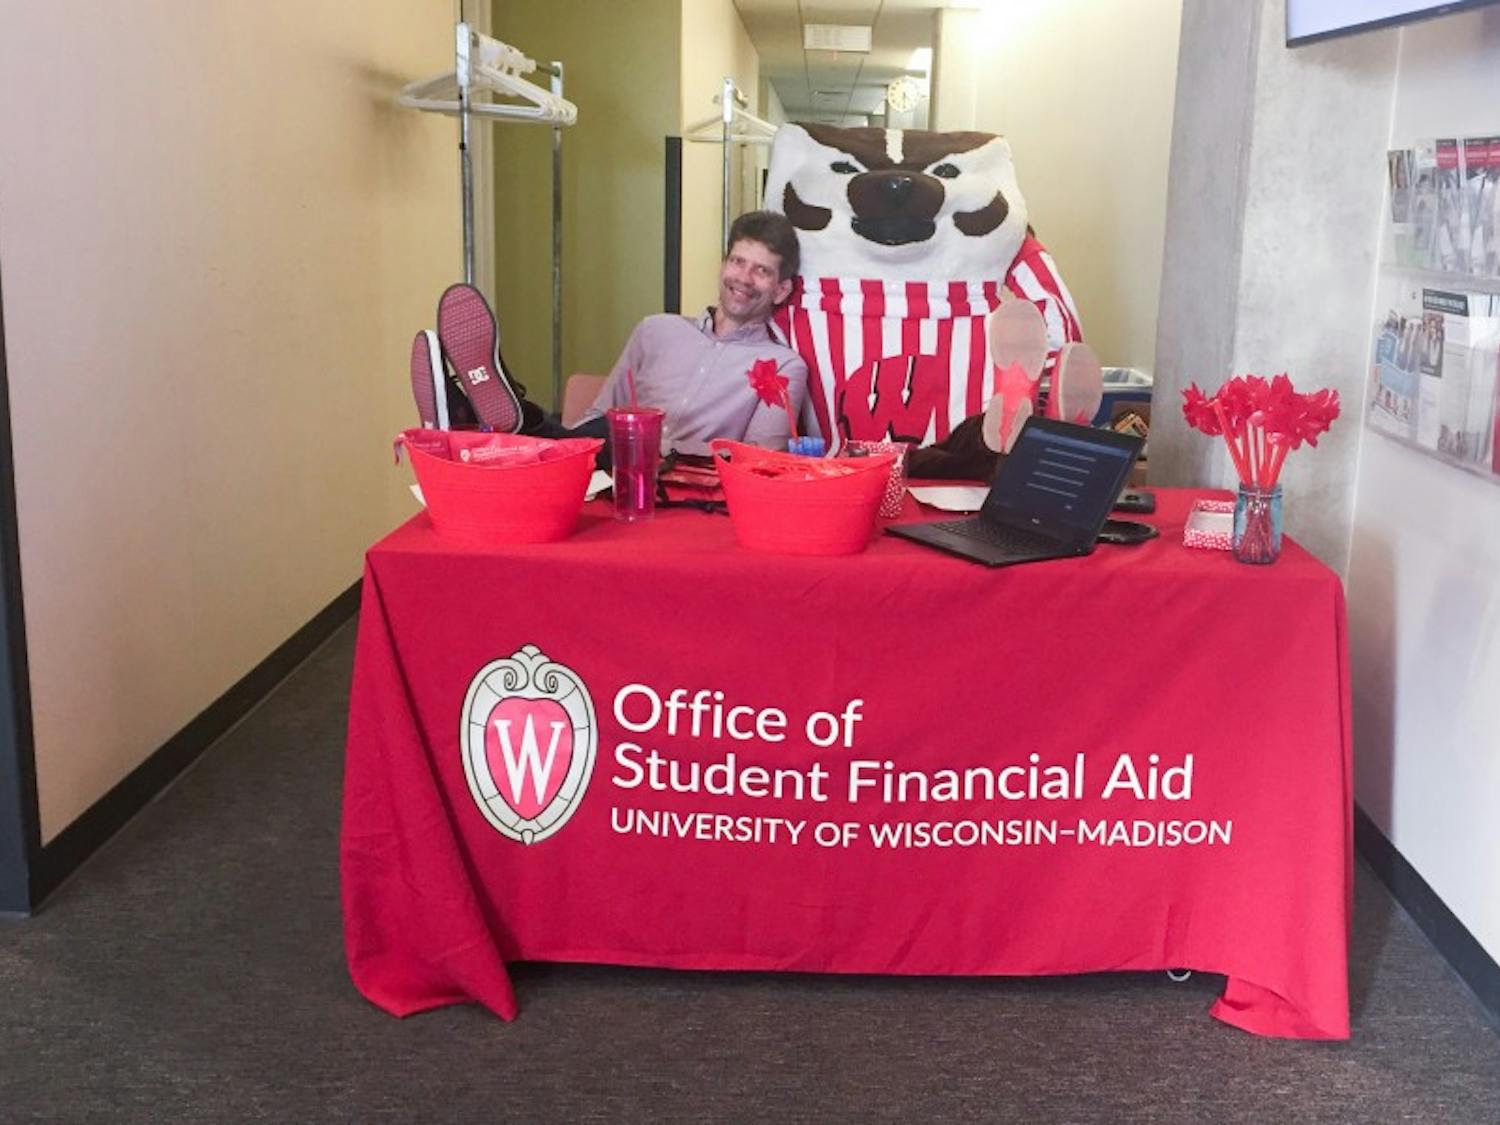 UW-Madison offers a lot of financial aid opportunities, but promoting the programs has proven to be difficult.